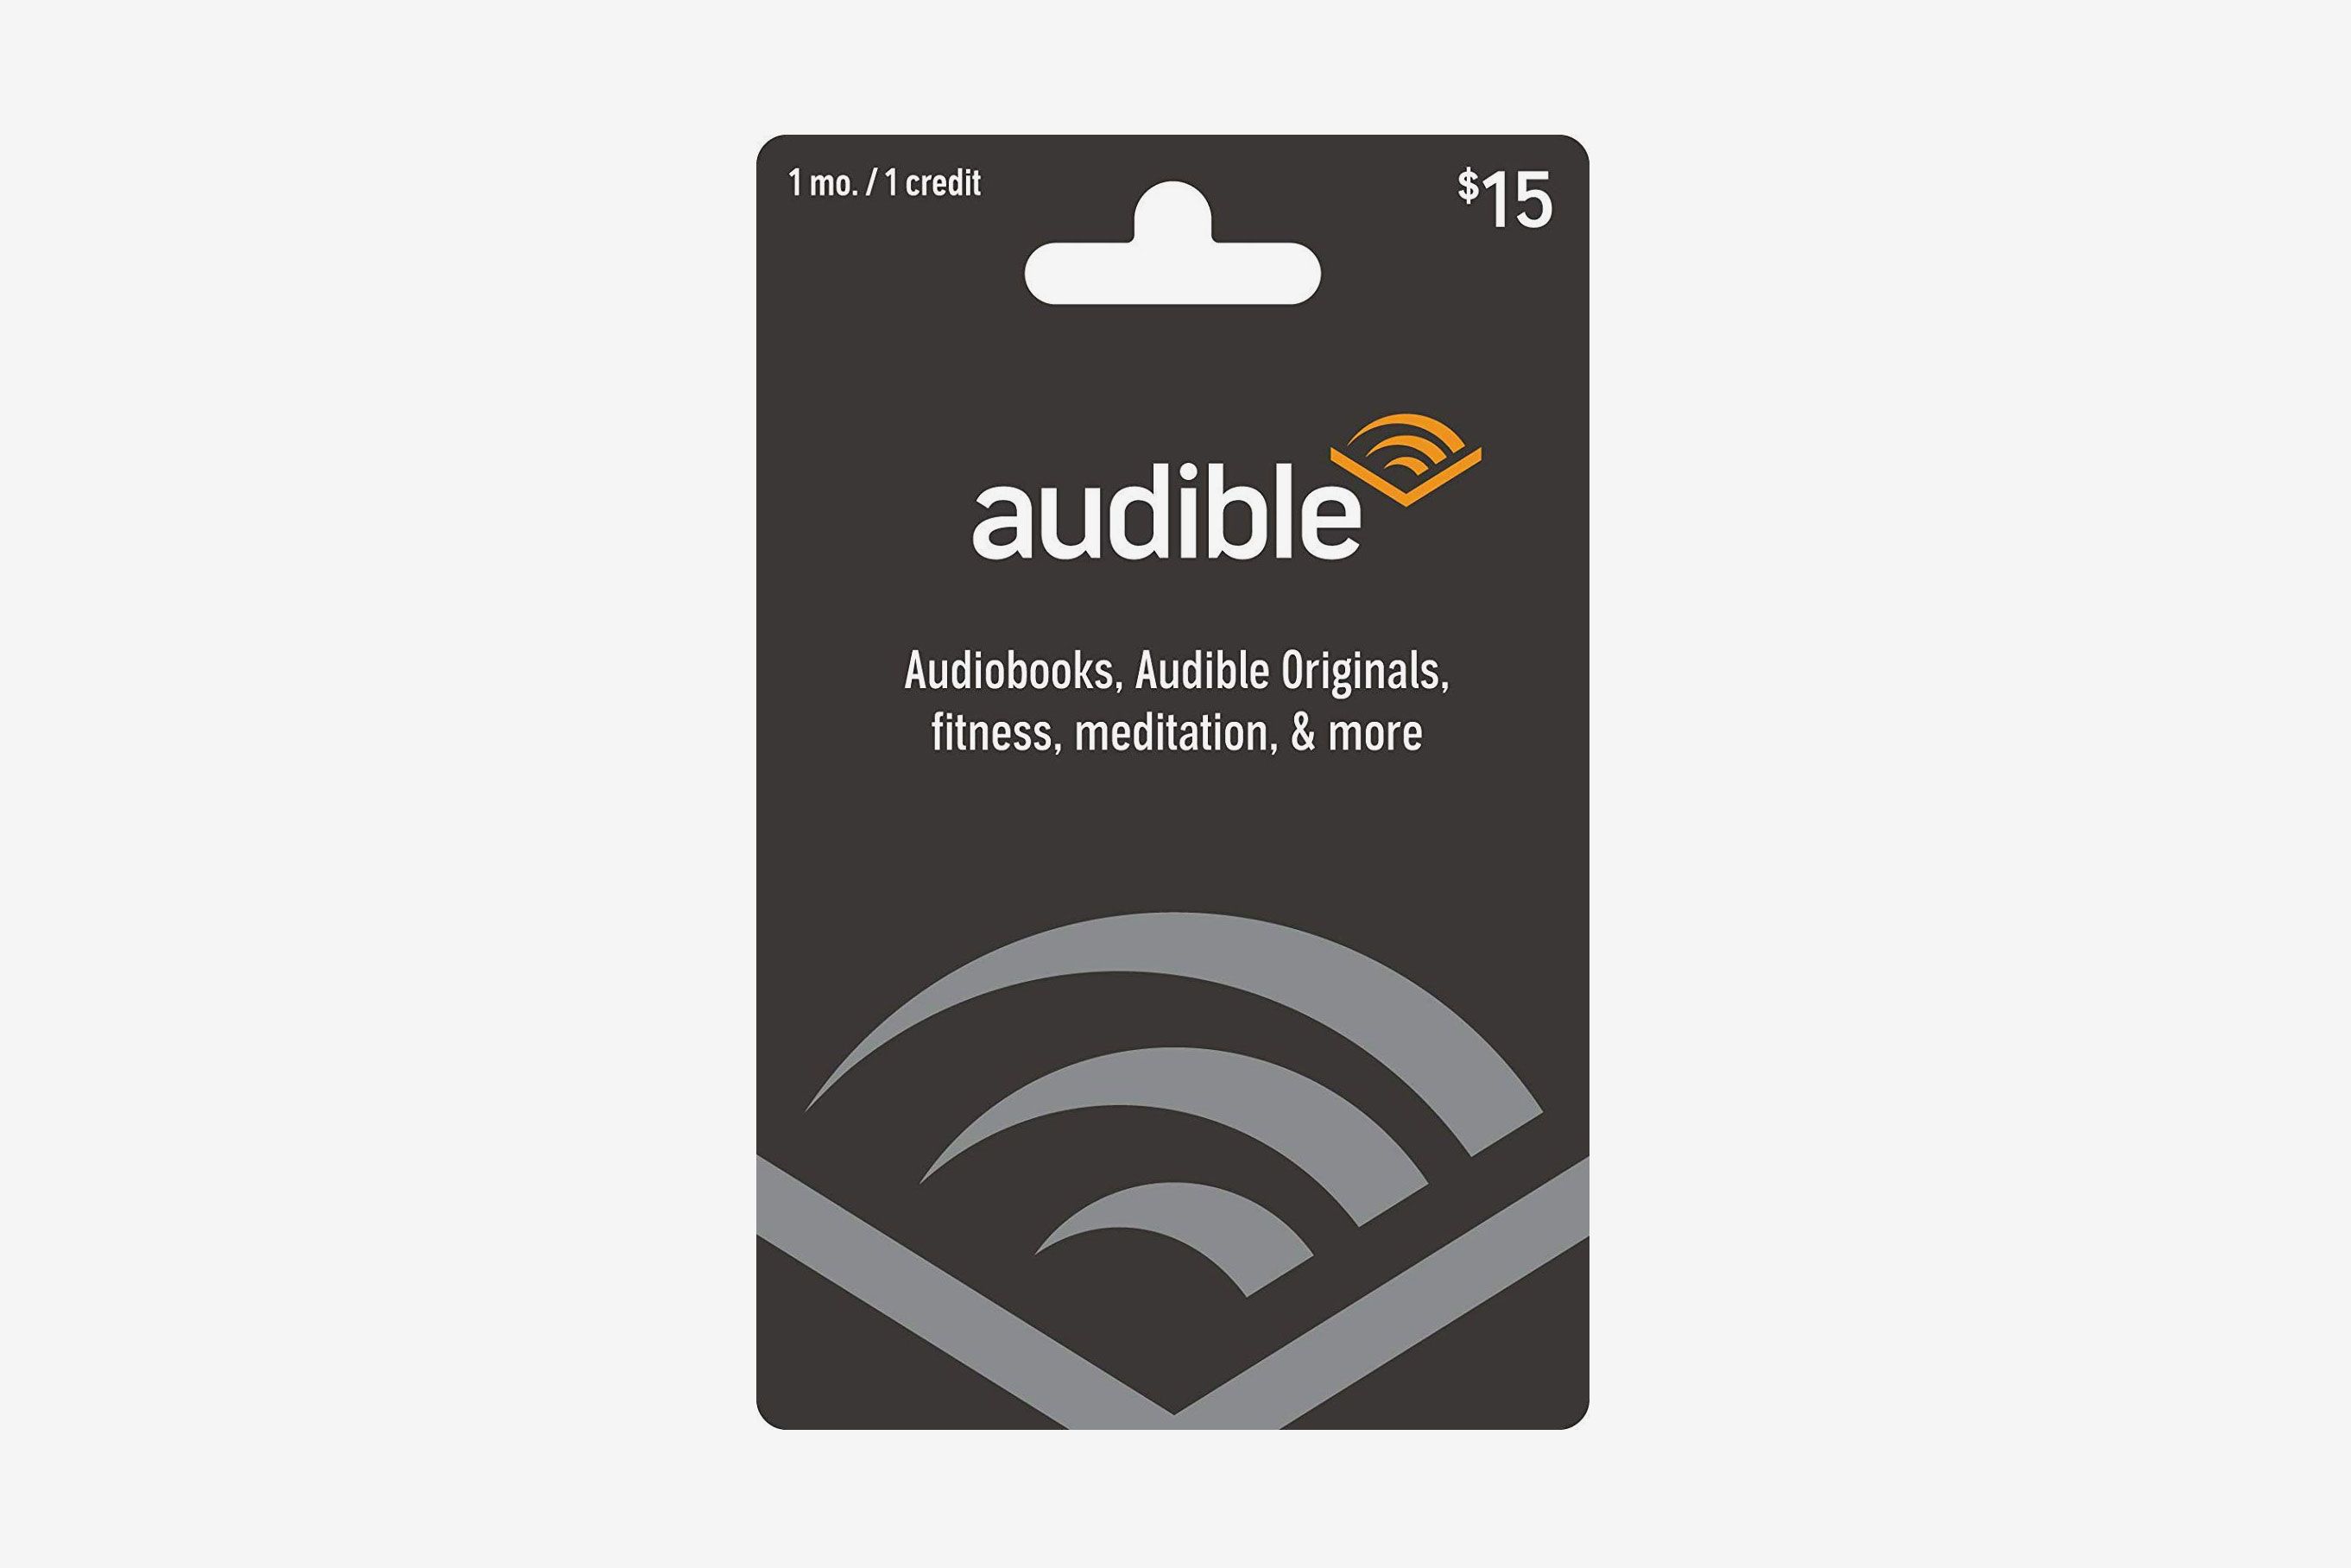 How to Gift an Audible Book  4 Ways